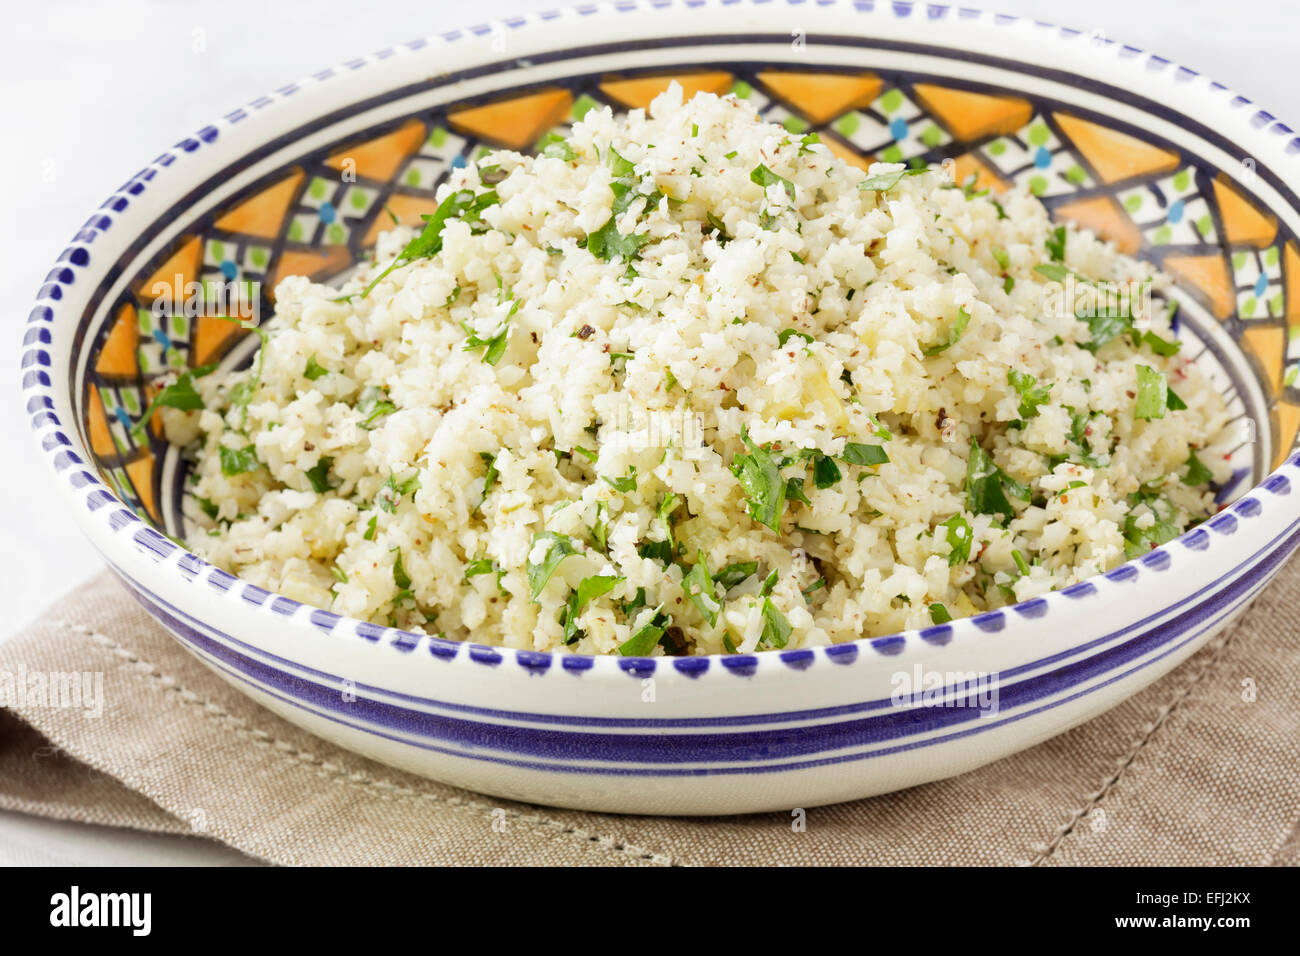 cauliflower prepared as couscous  with chopped parsley, za'atar,  and preserved lemons Stock Photo